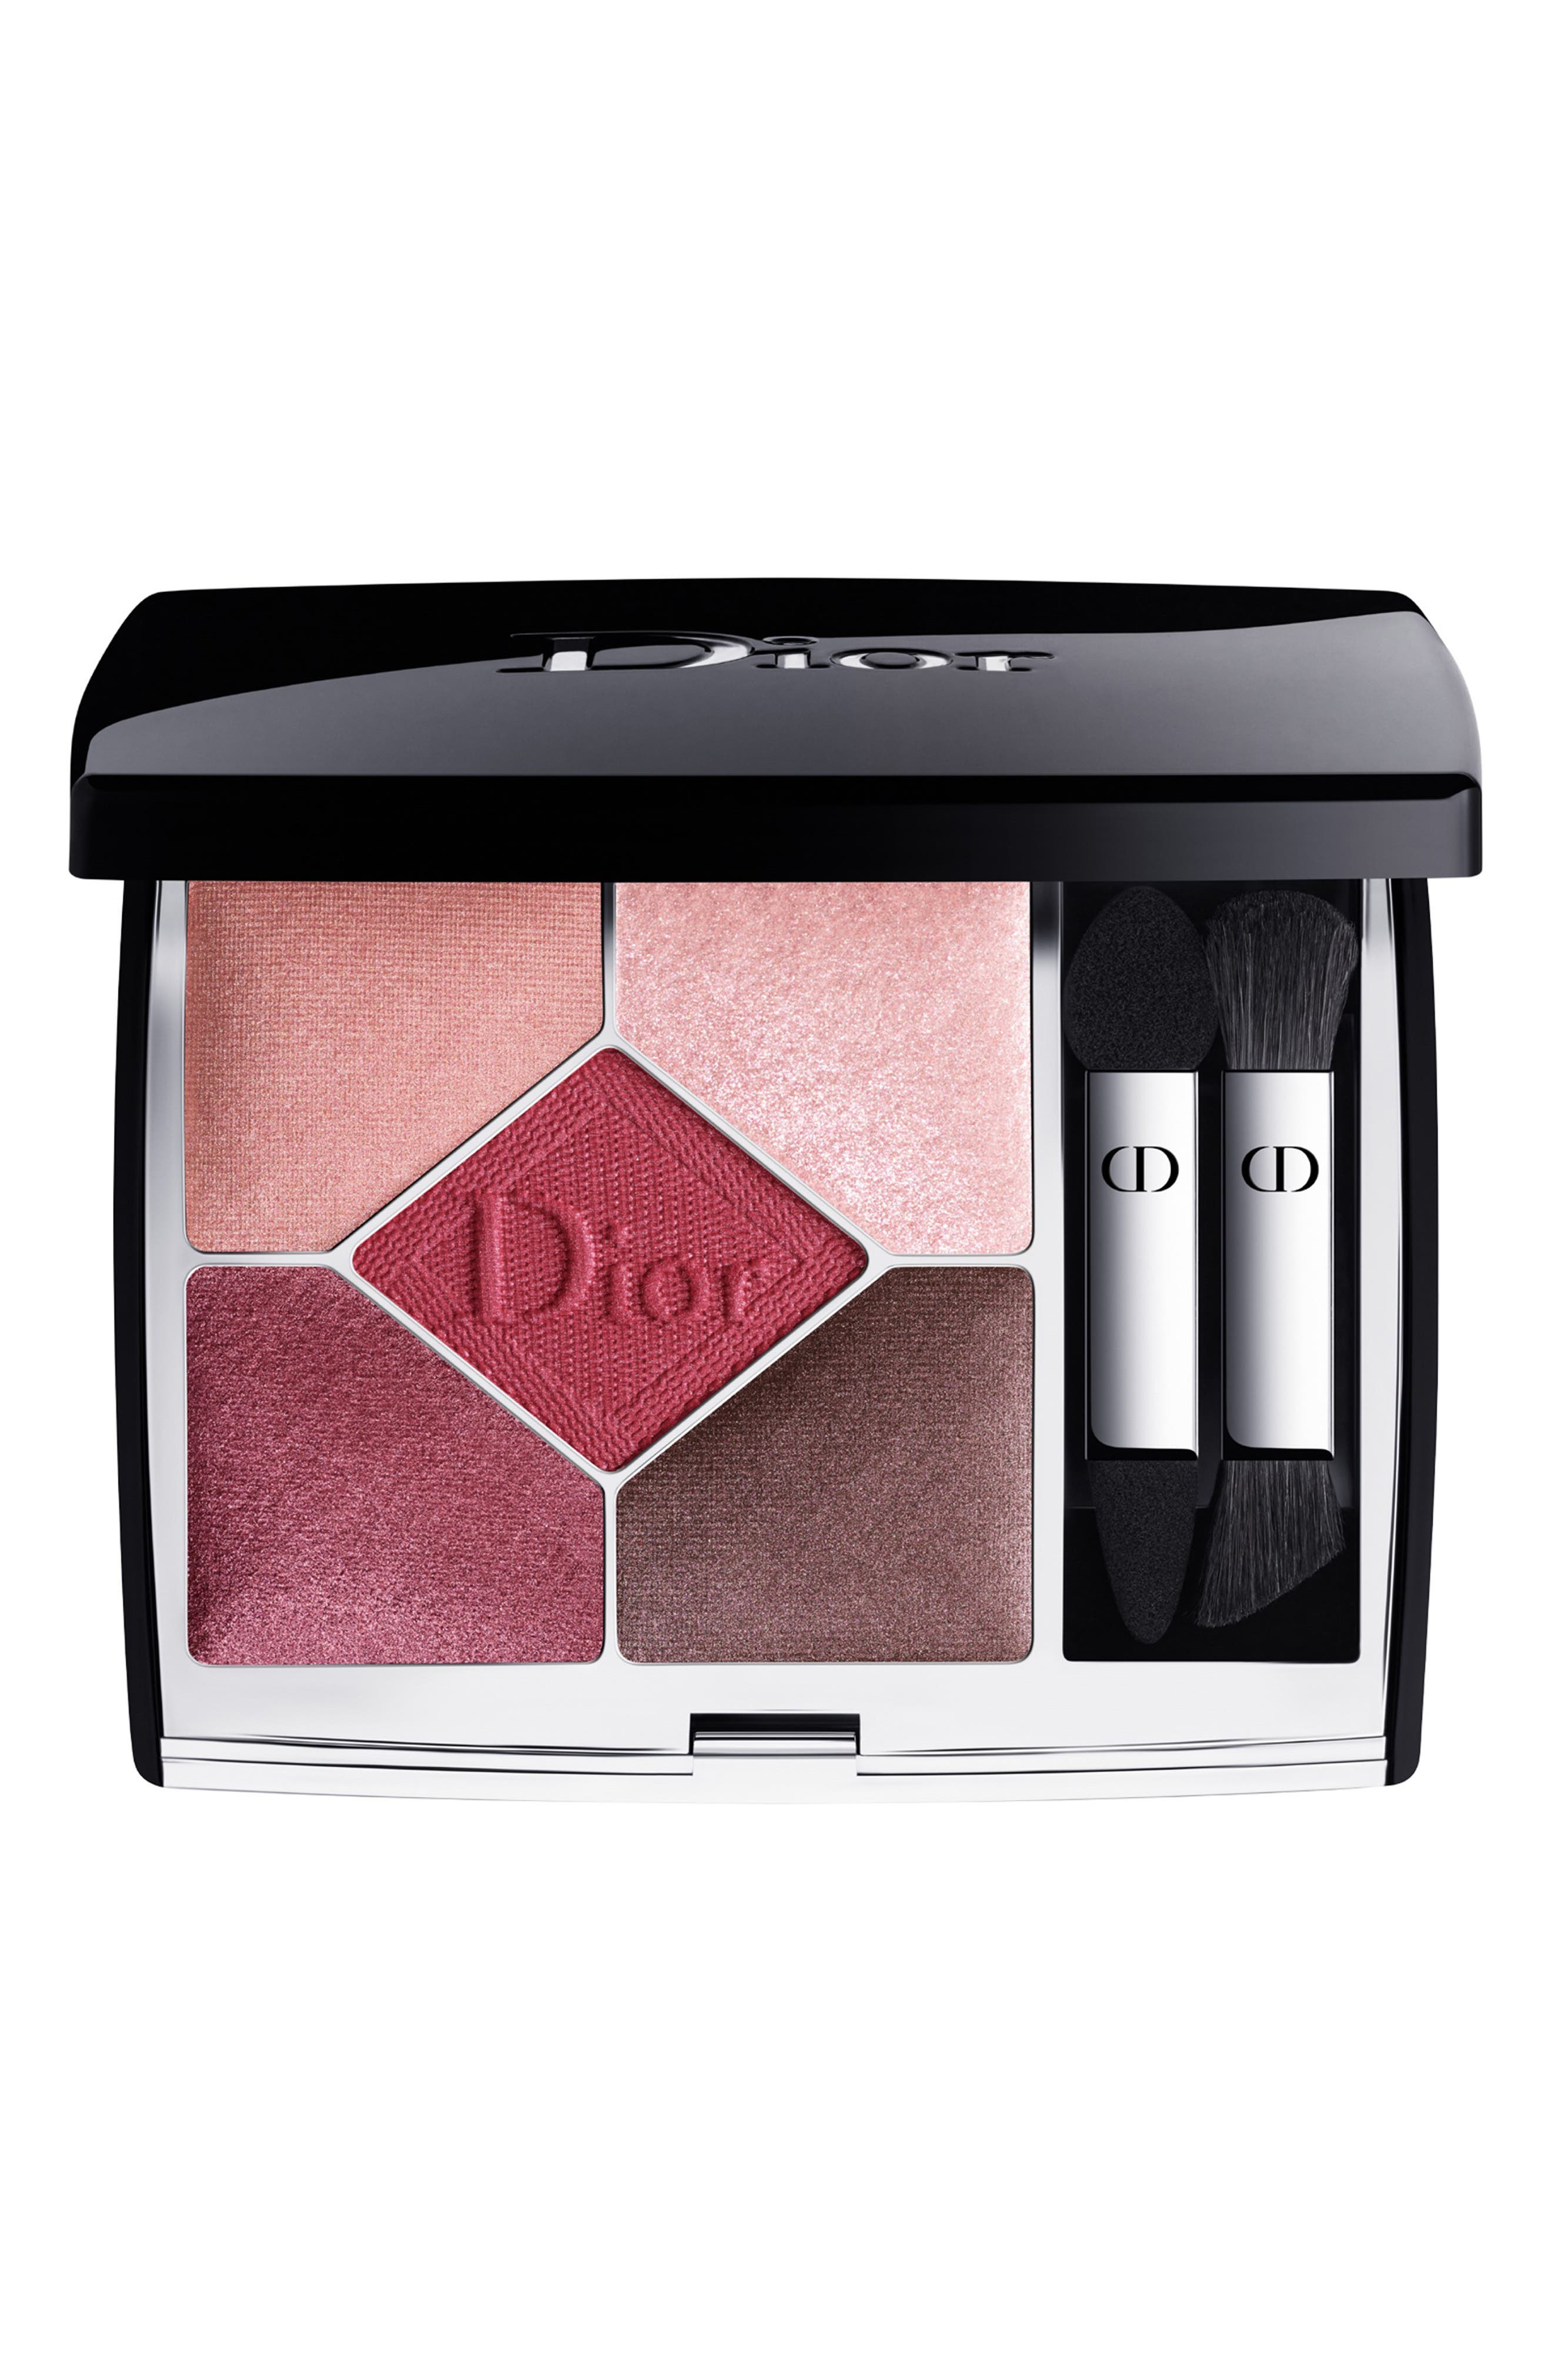 Dior 5 Couleurs Couture Eyeshadow Palette in 879 Rouge Trafalgar